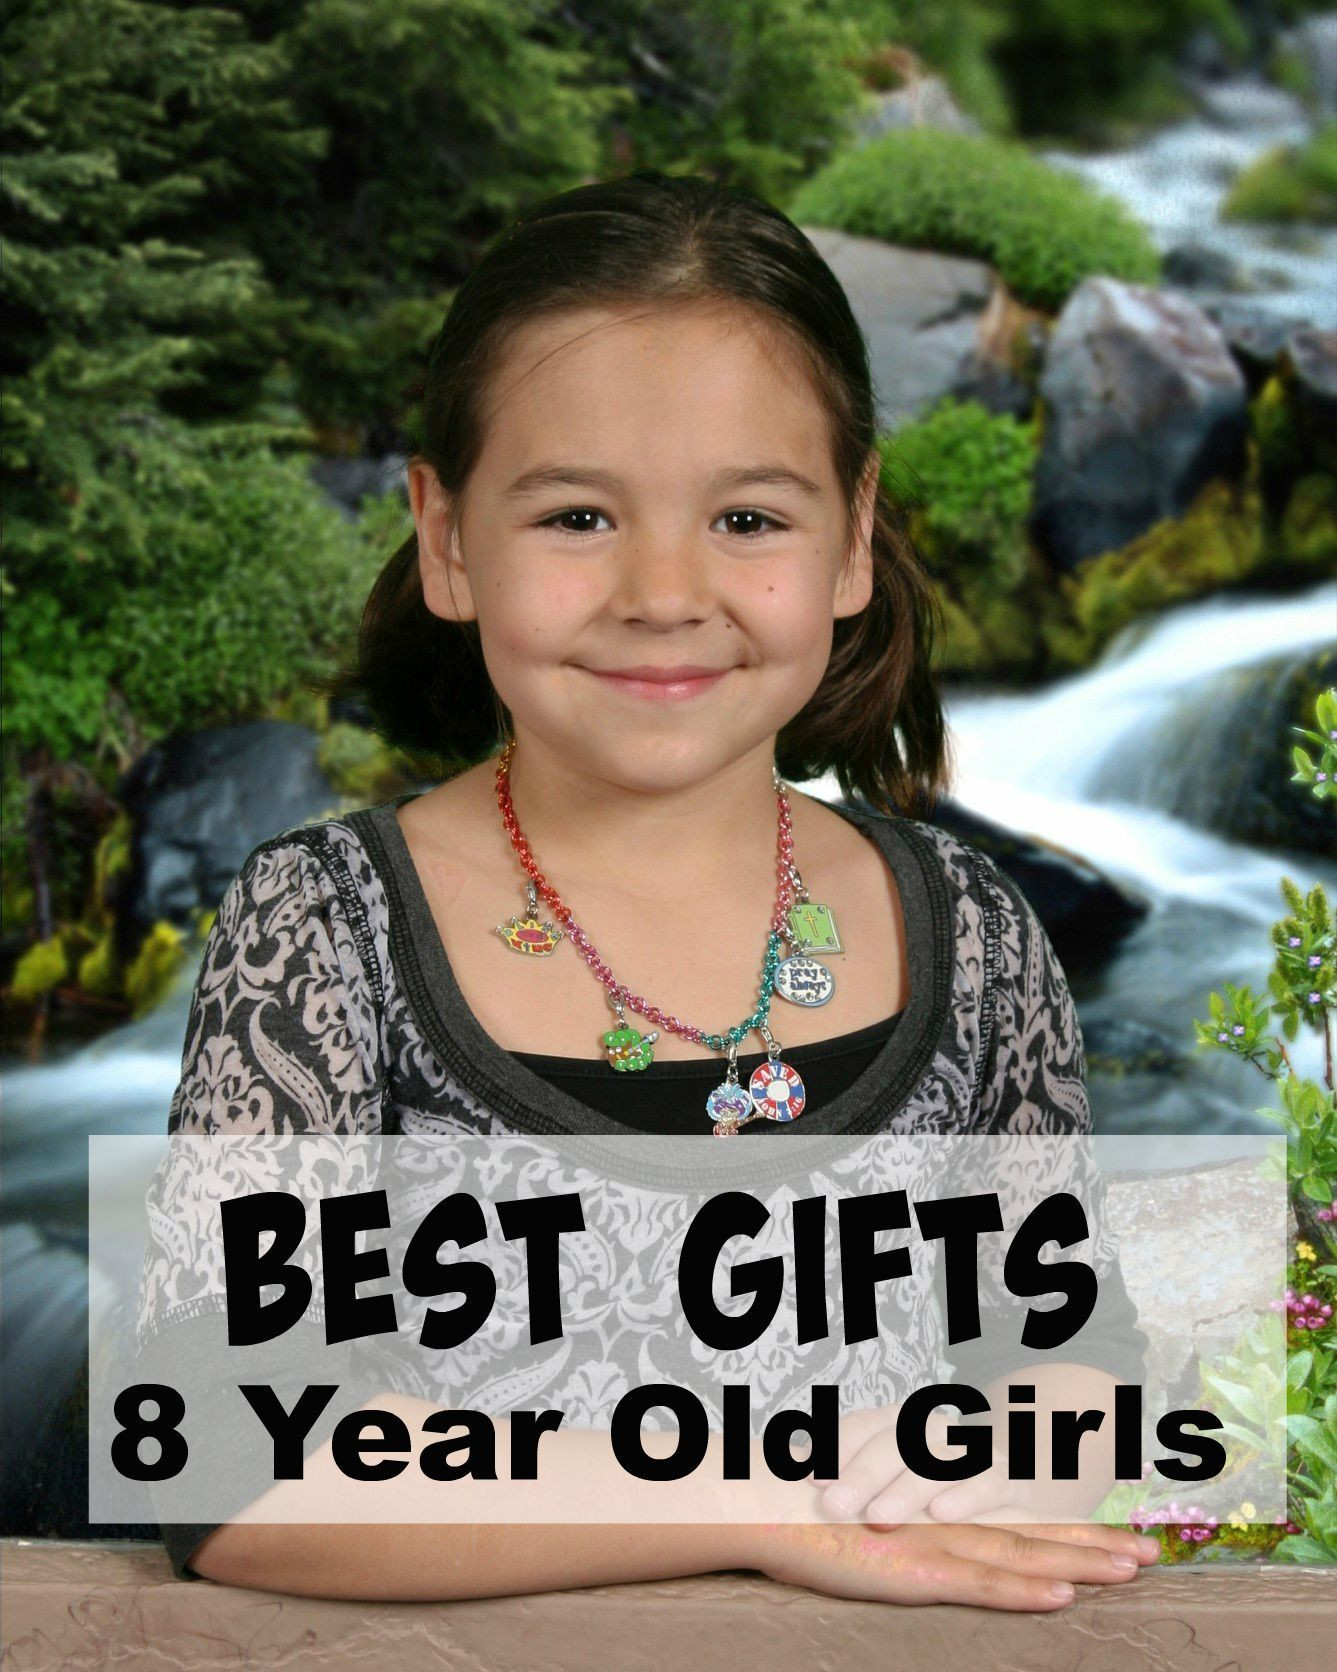 Christmas Gift Ideas For 8 Year Old Girl
 25 Spectacular Gift Ideas For 8 Year Old Girls That WILL